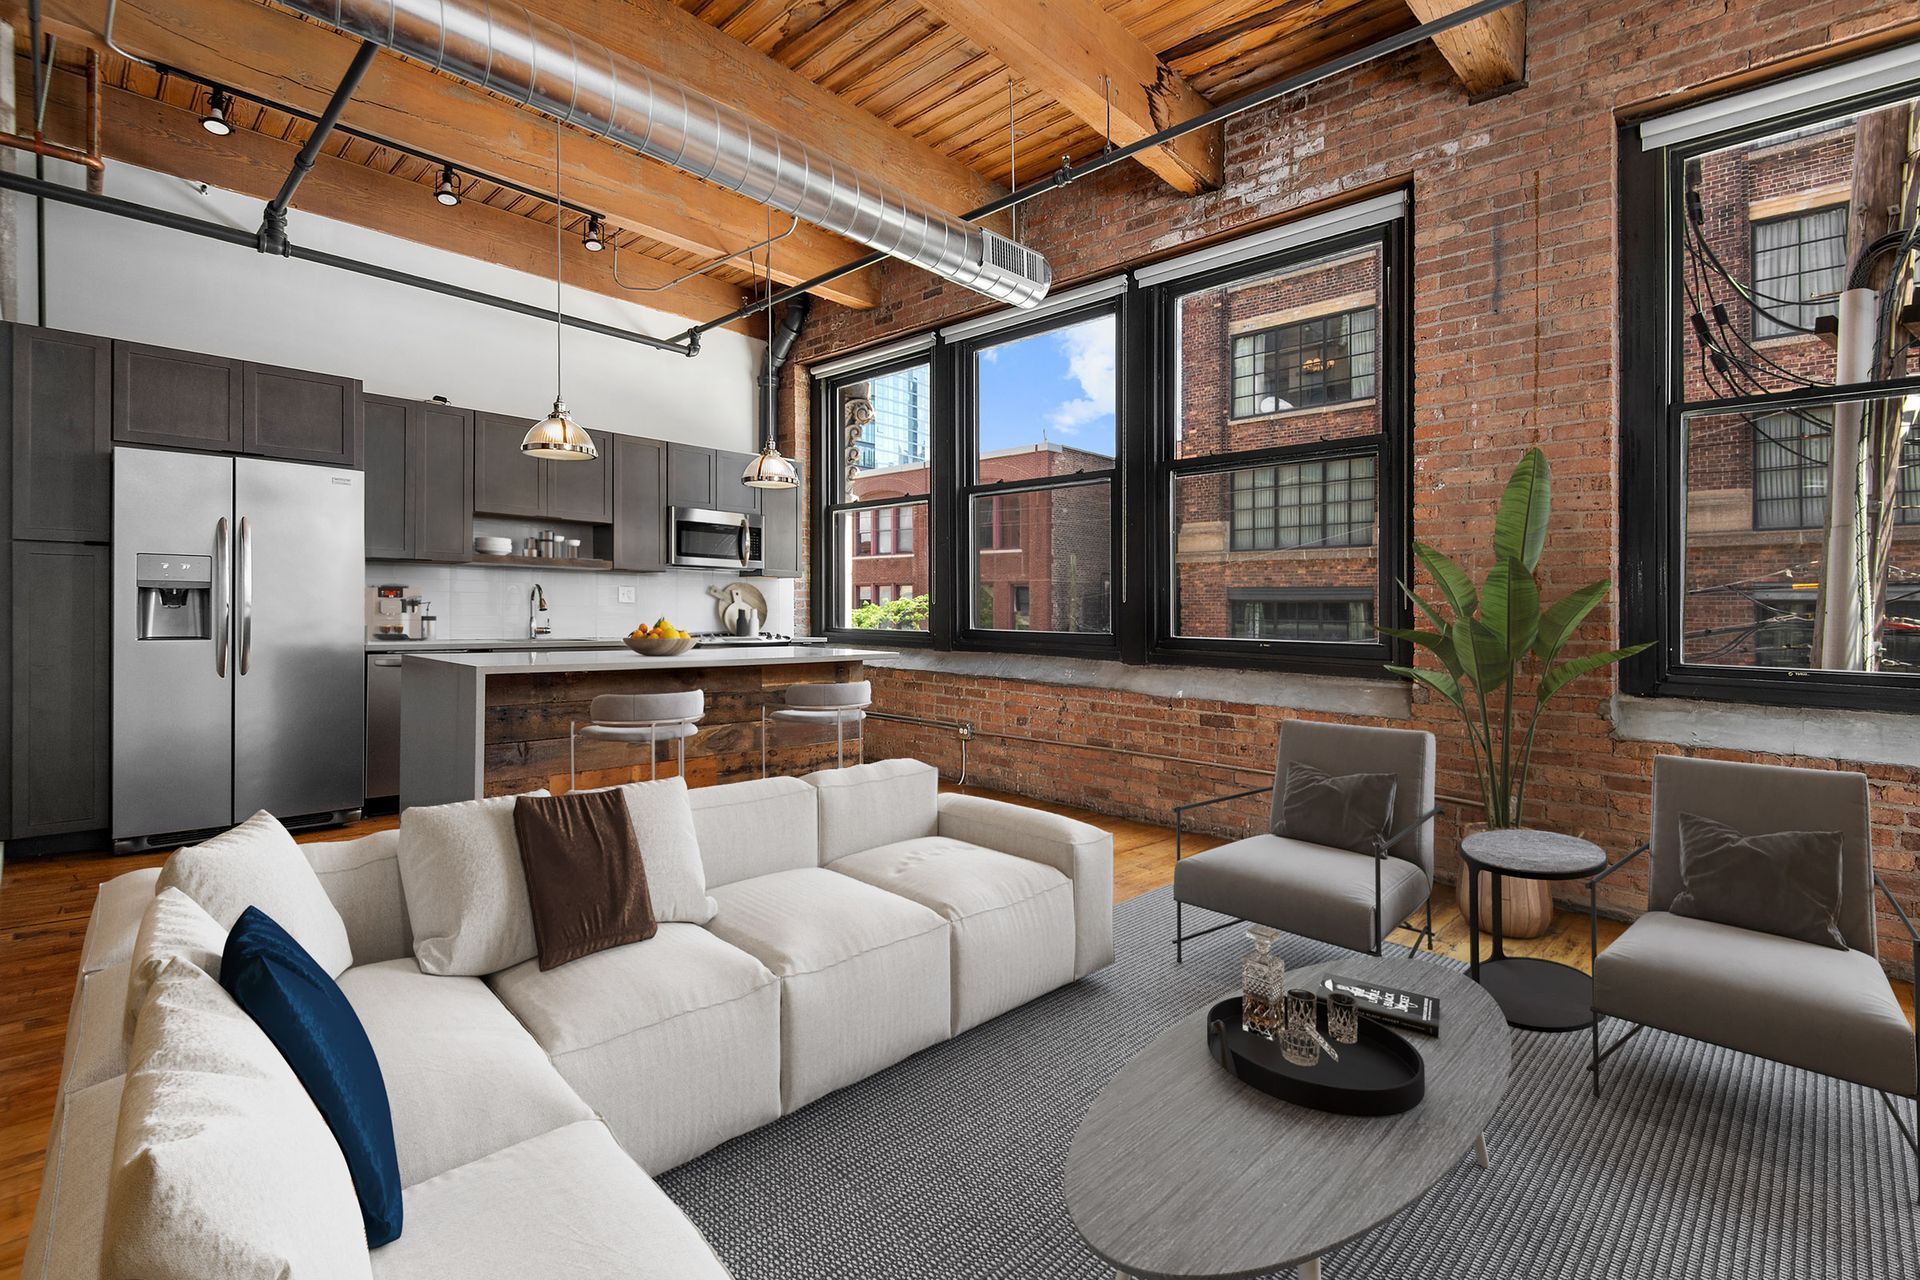 A living room with a couch , chairs , and a refrigerator at The Lofts at Gin Alley.